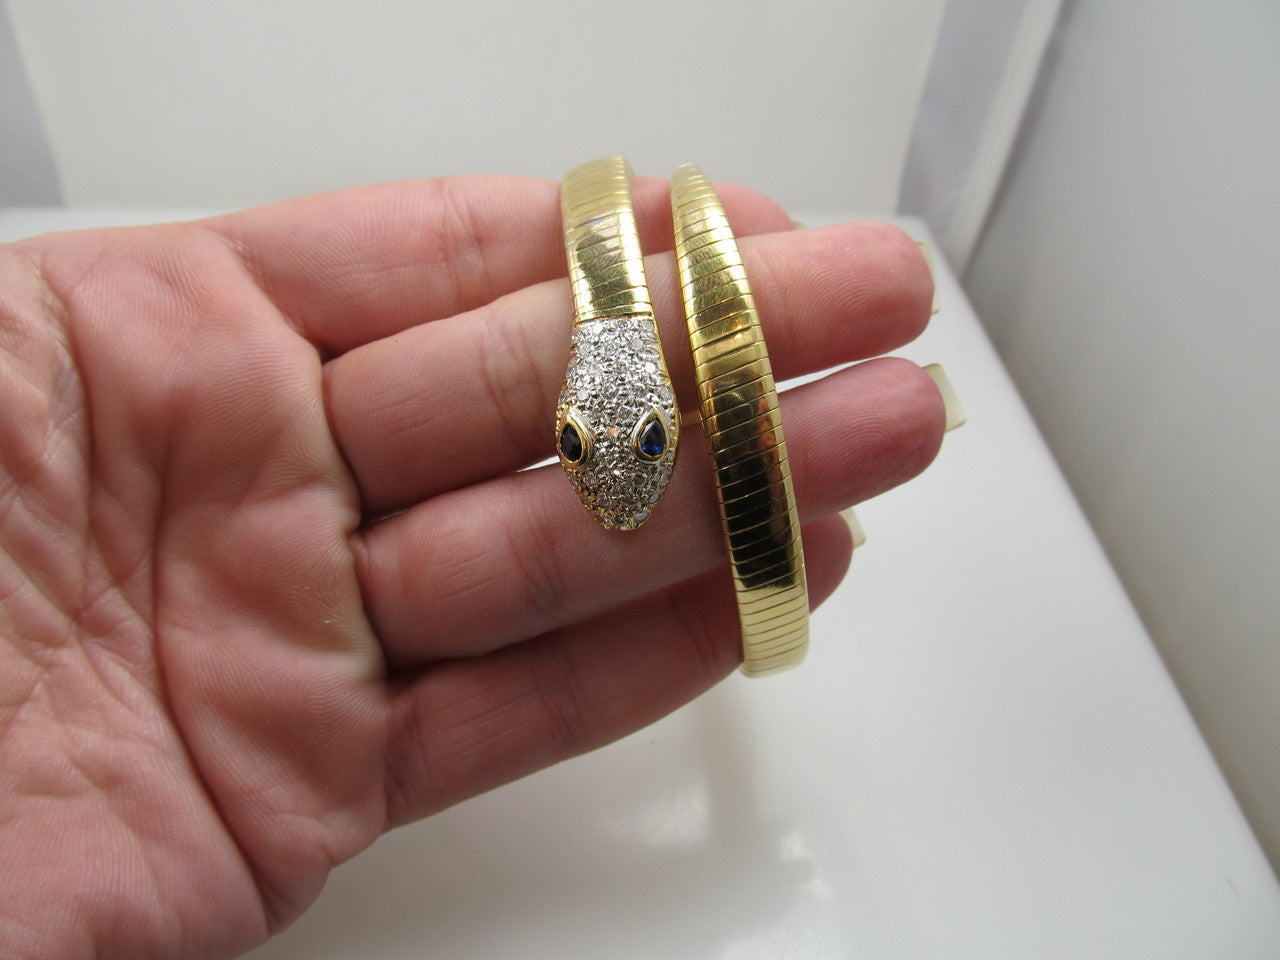 18k Gold Snake Bangle Bracelet With Sapphires And .80cts In Diamonds, Si1 F-g. Circa 1960